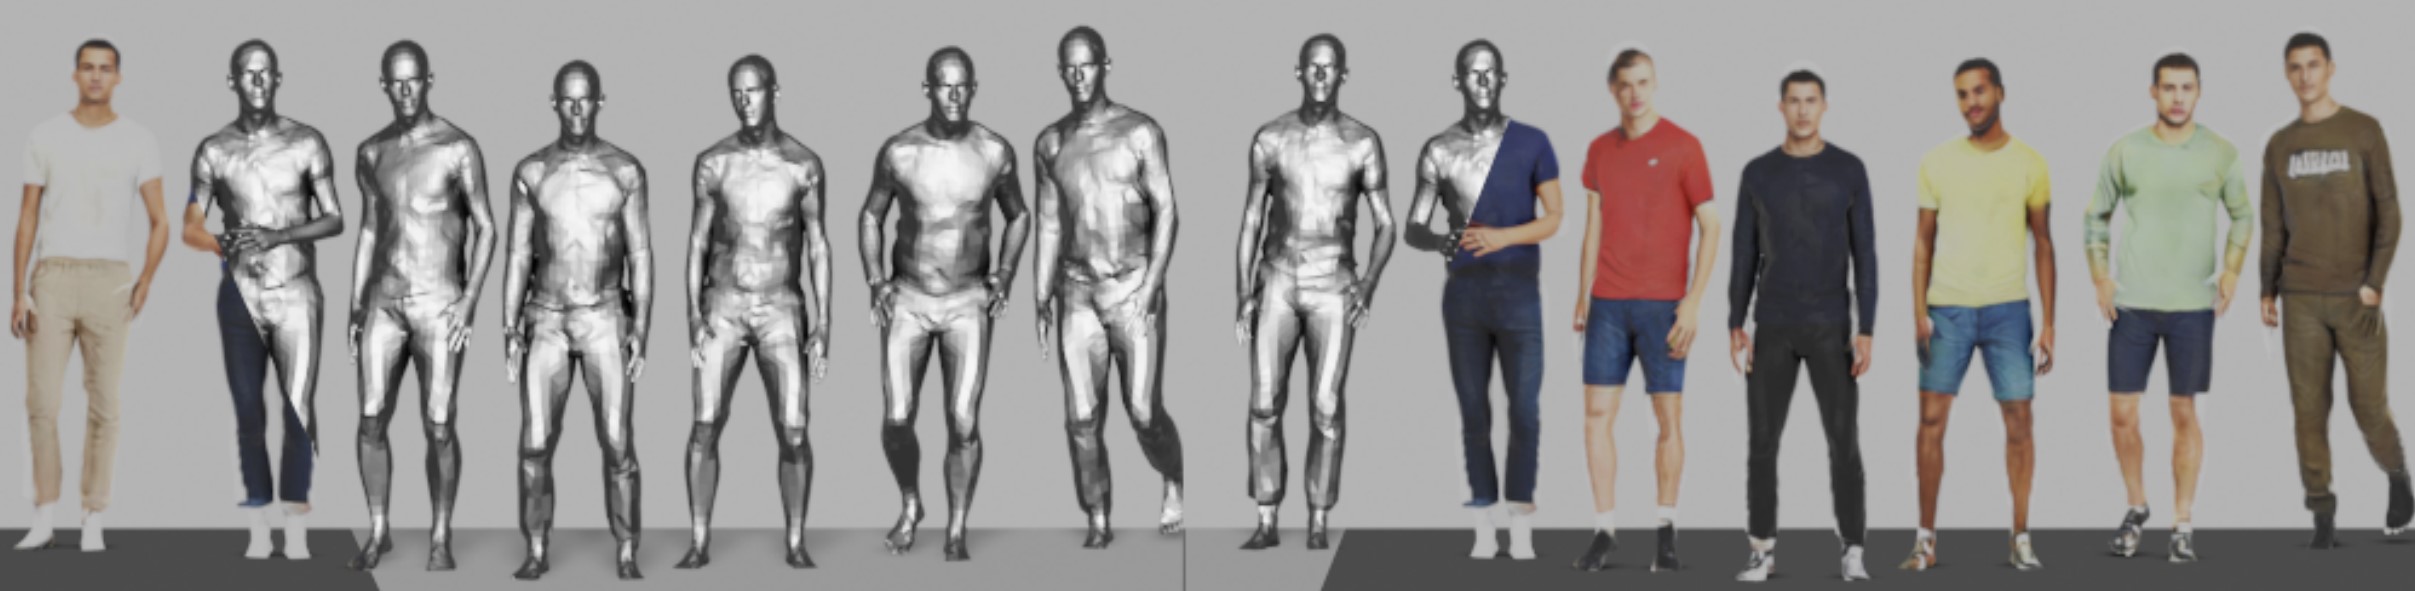 SCULPT - Shape-Conditioned Unpaired Learning of Pose-dependent Clothed and Textured Human Meshes